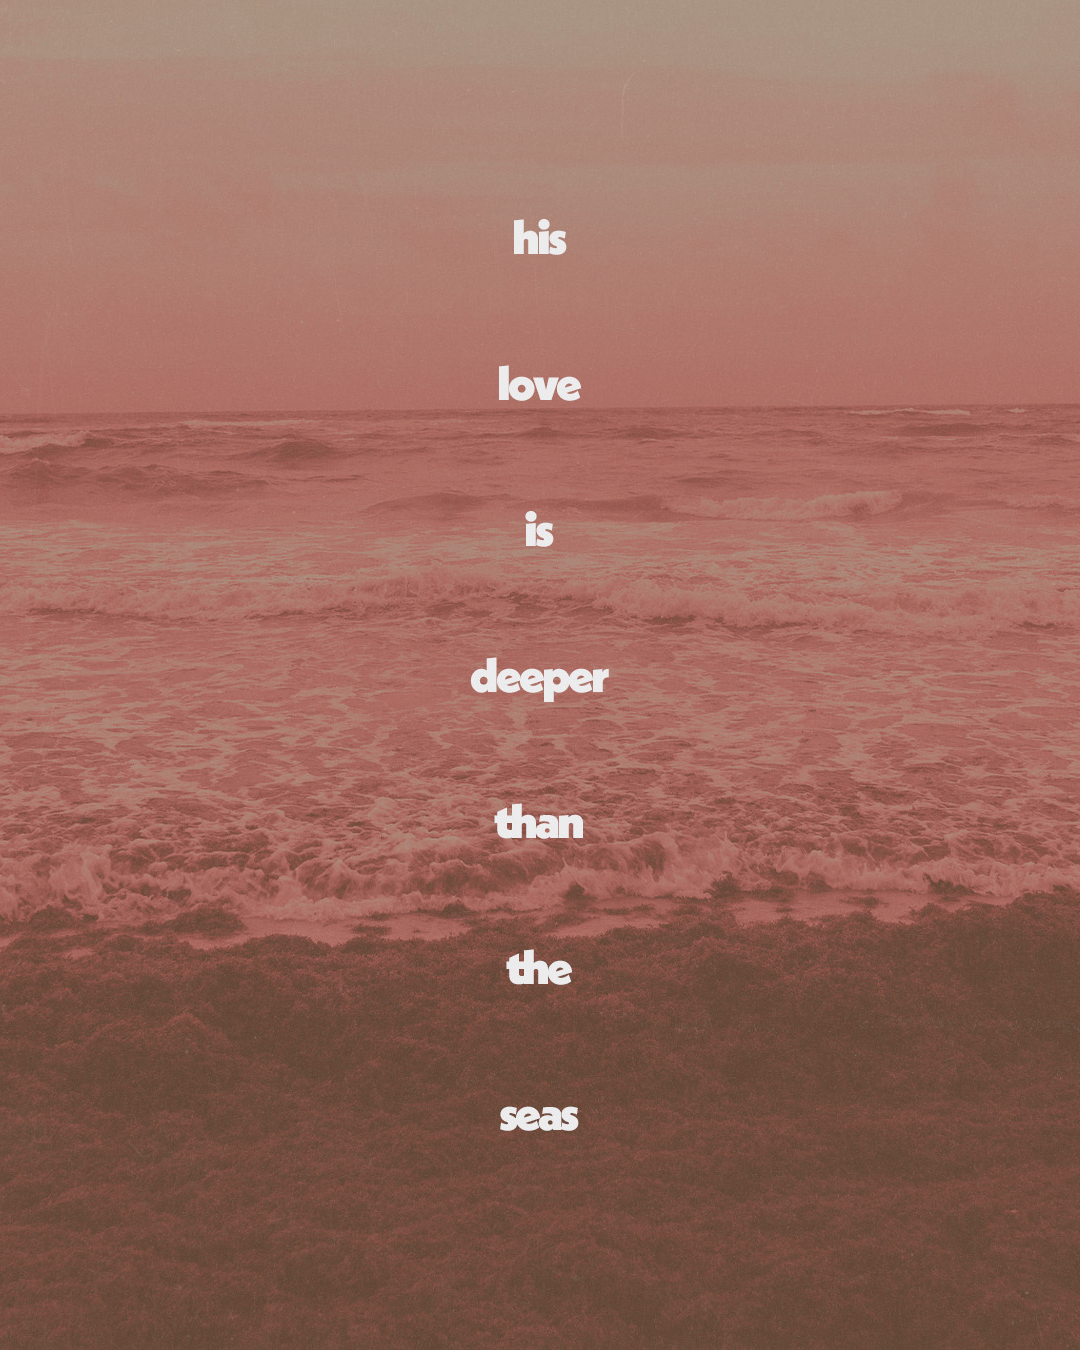 his love is deeper than the seas